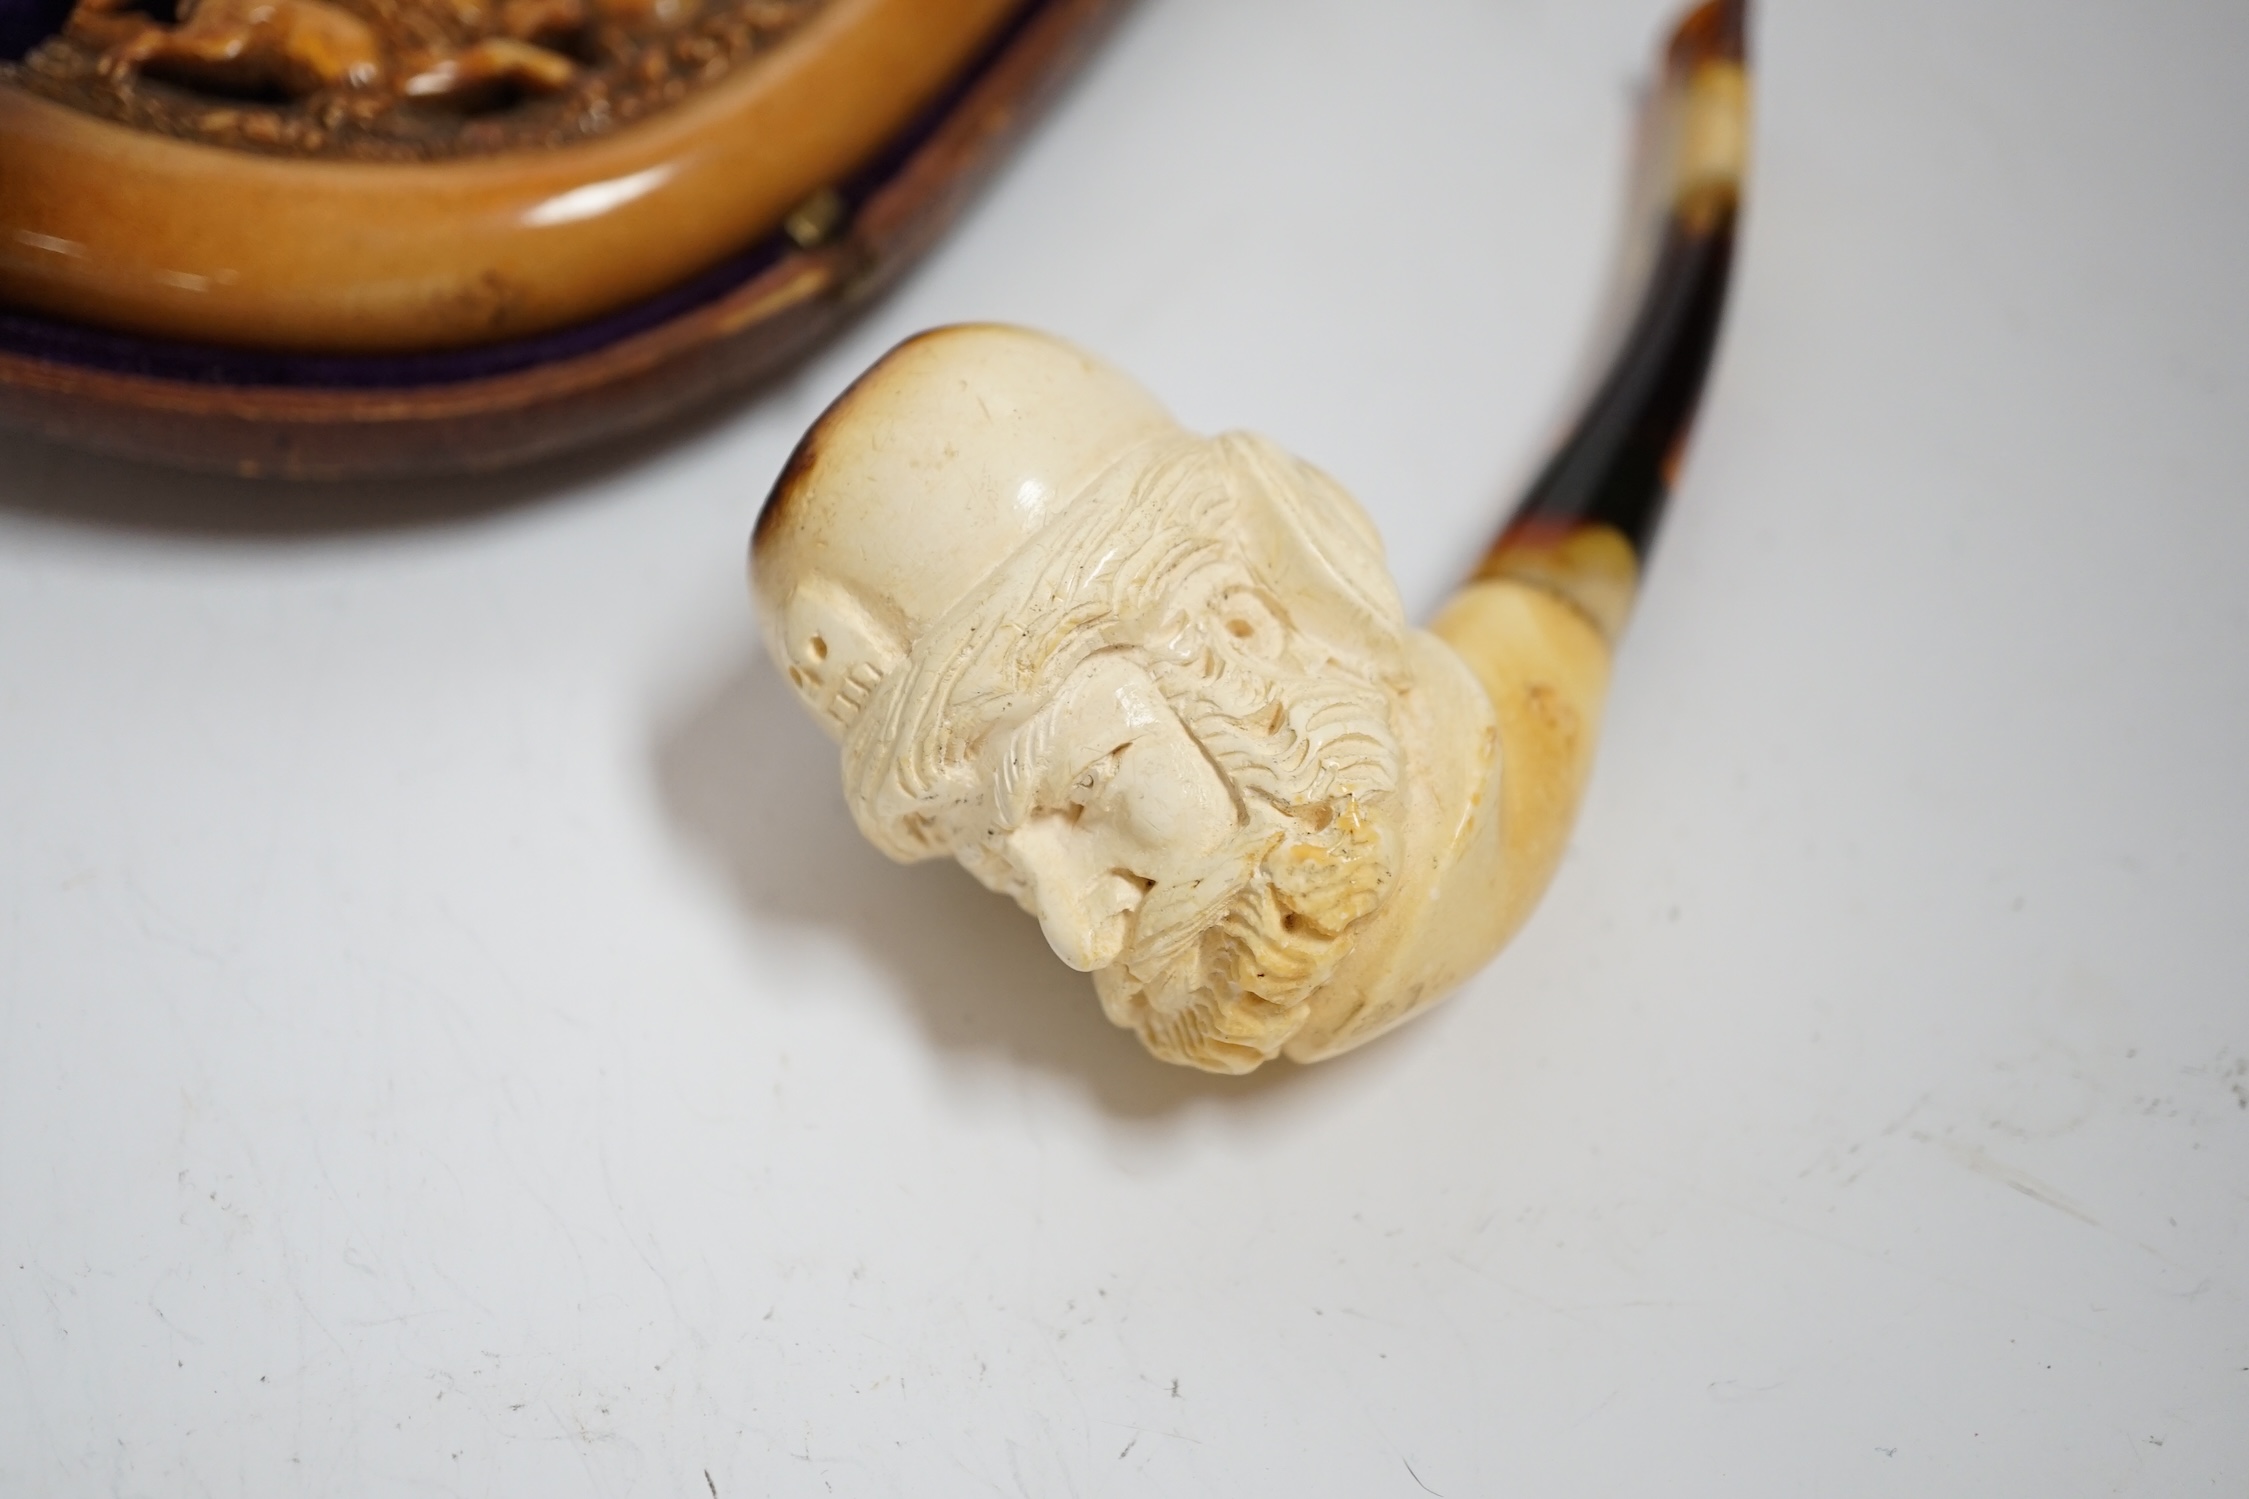 Two carved Meerschaum pipes, one in the form of a huntsman on horseback with amber mouthpiece